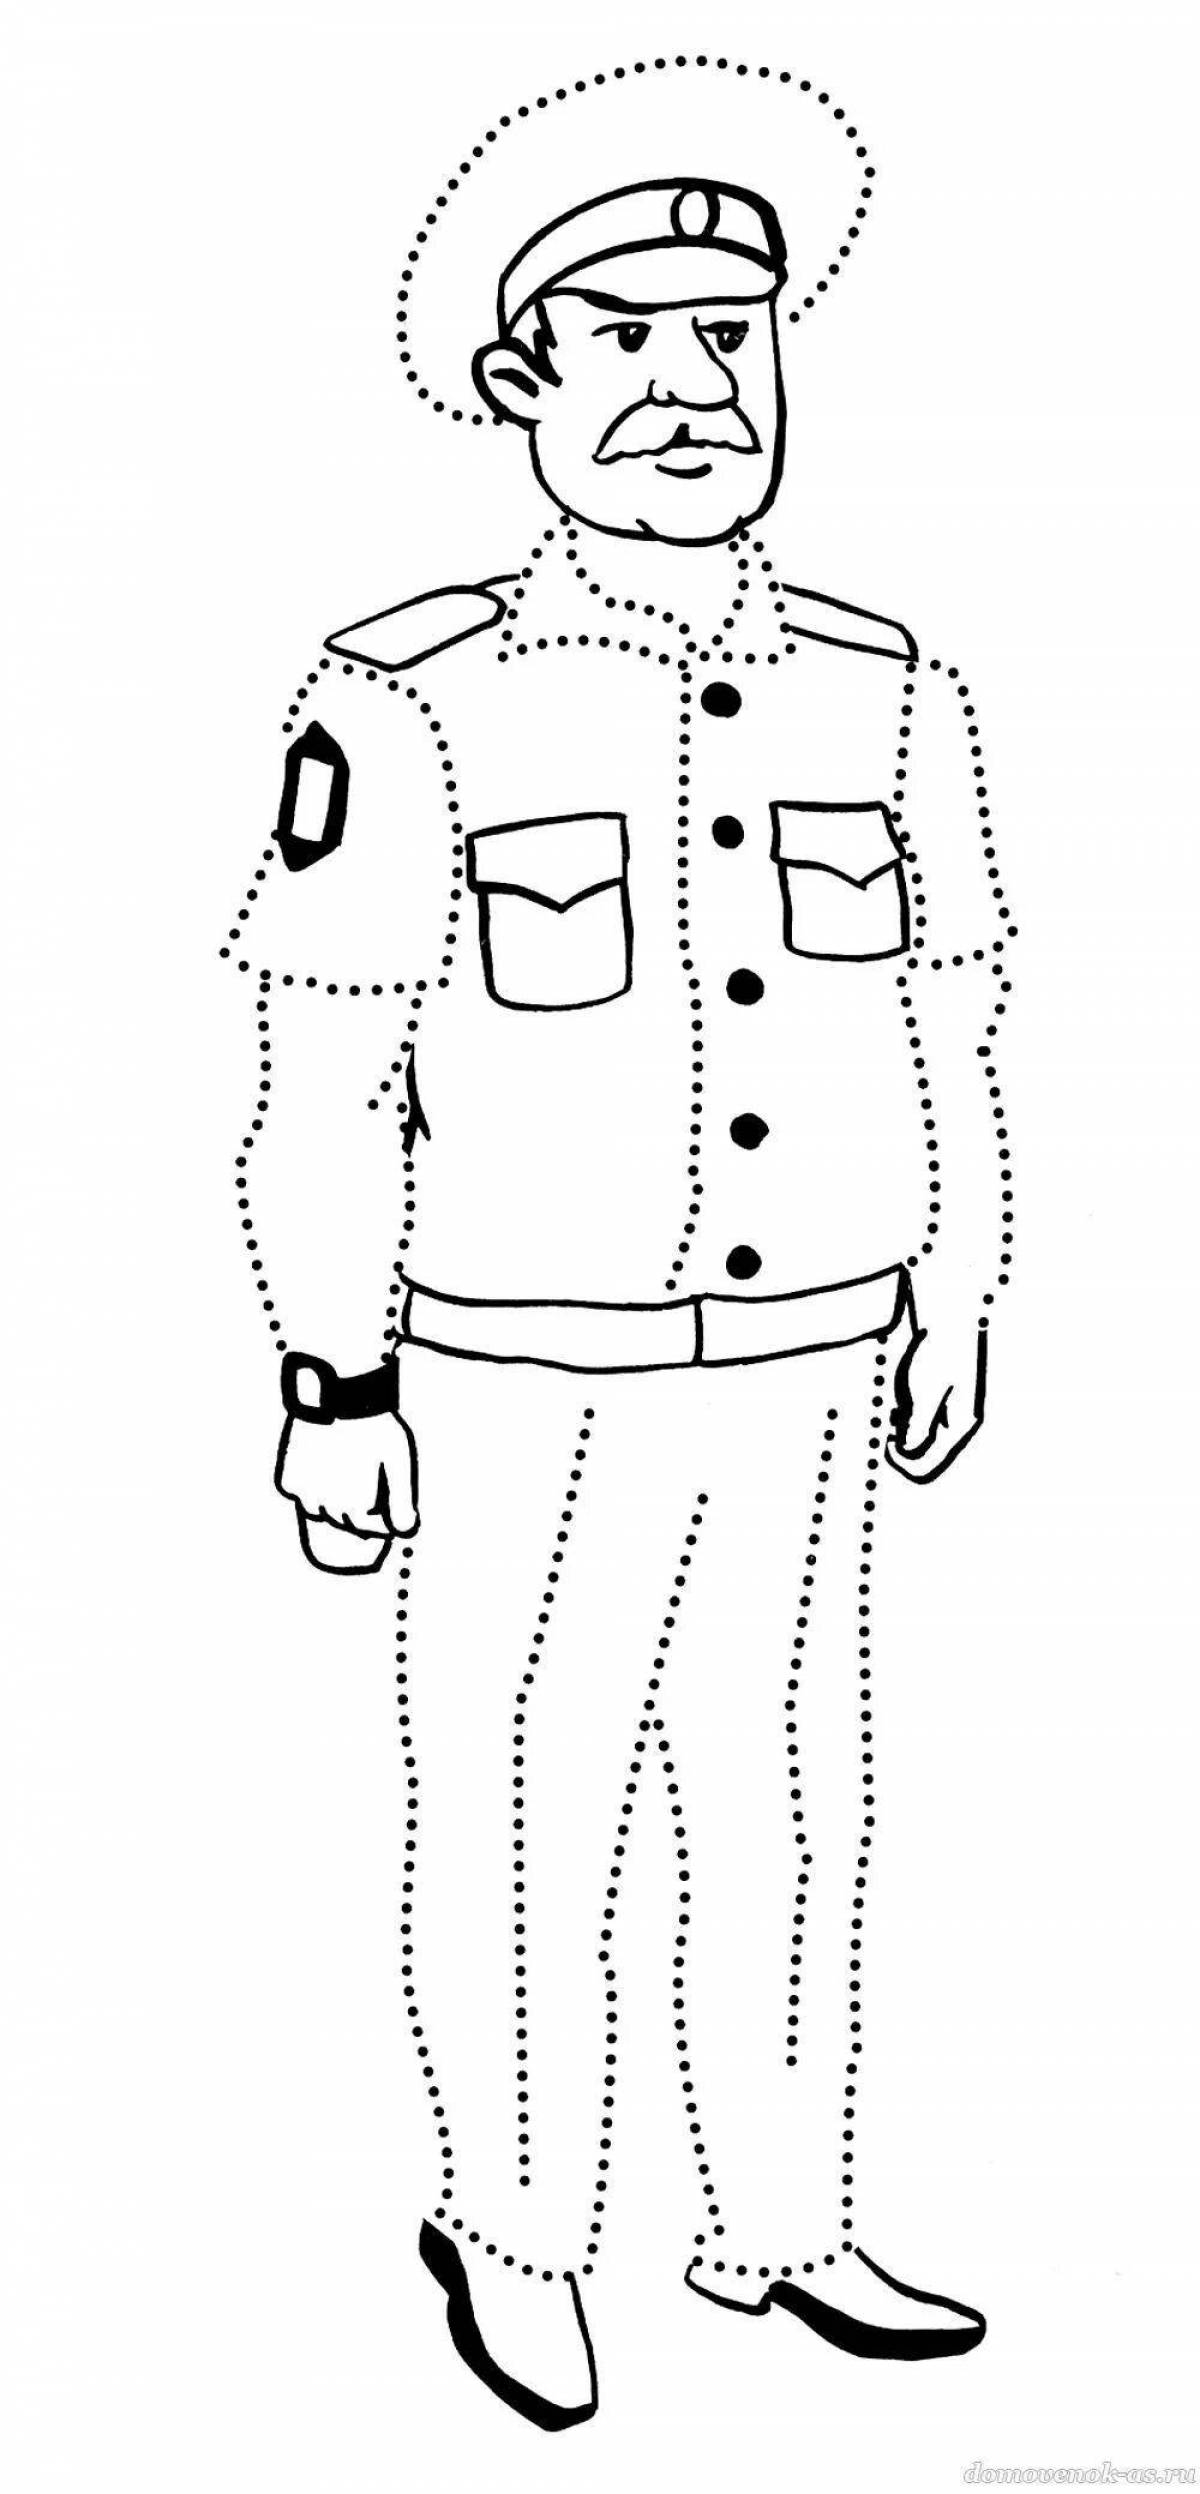 Coloring book playful police profession